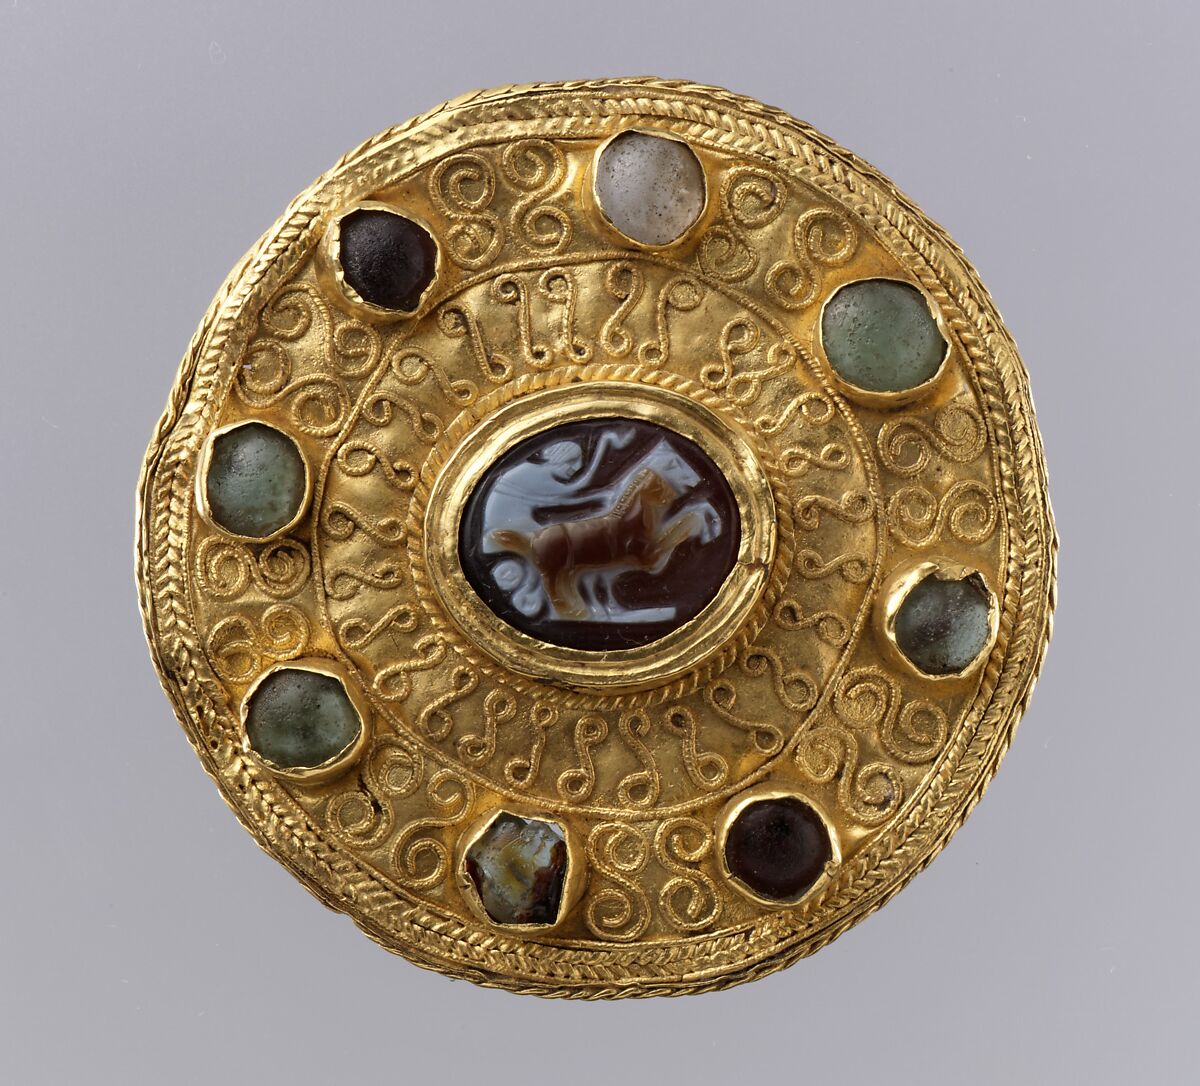 Disk Brooch with Cameo, Sheet gold, onyx, glass, and wire, Langobardic (mount); Roman (cameo) 